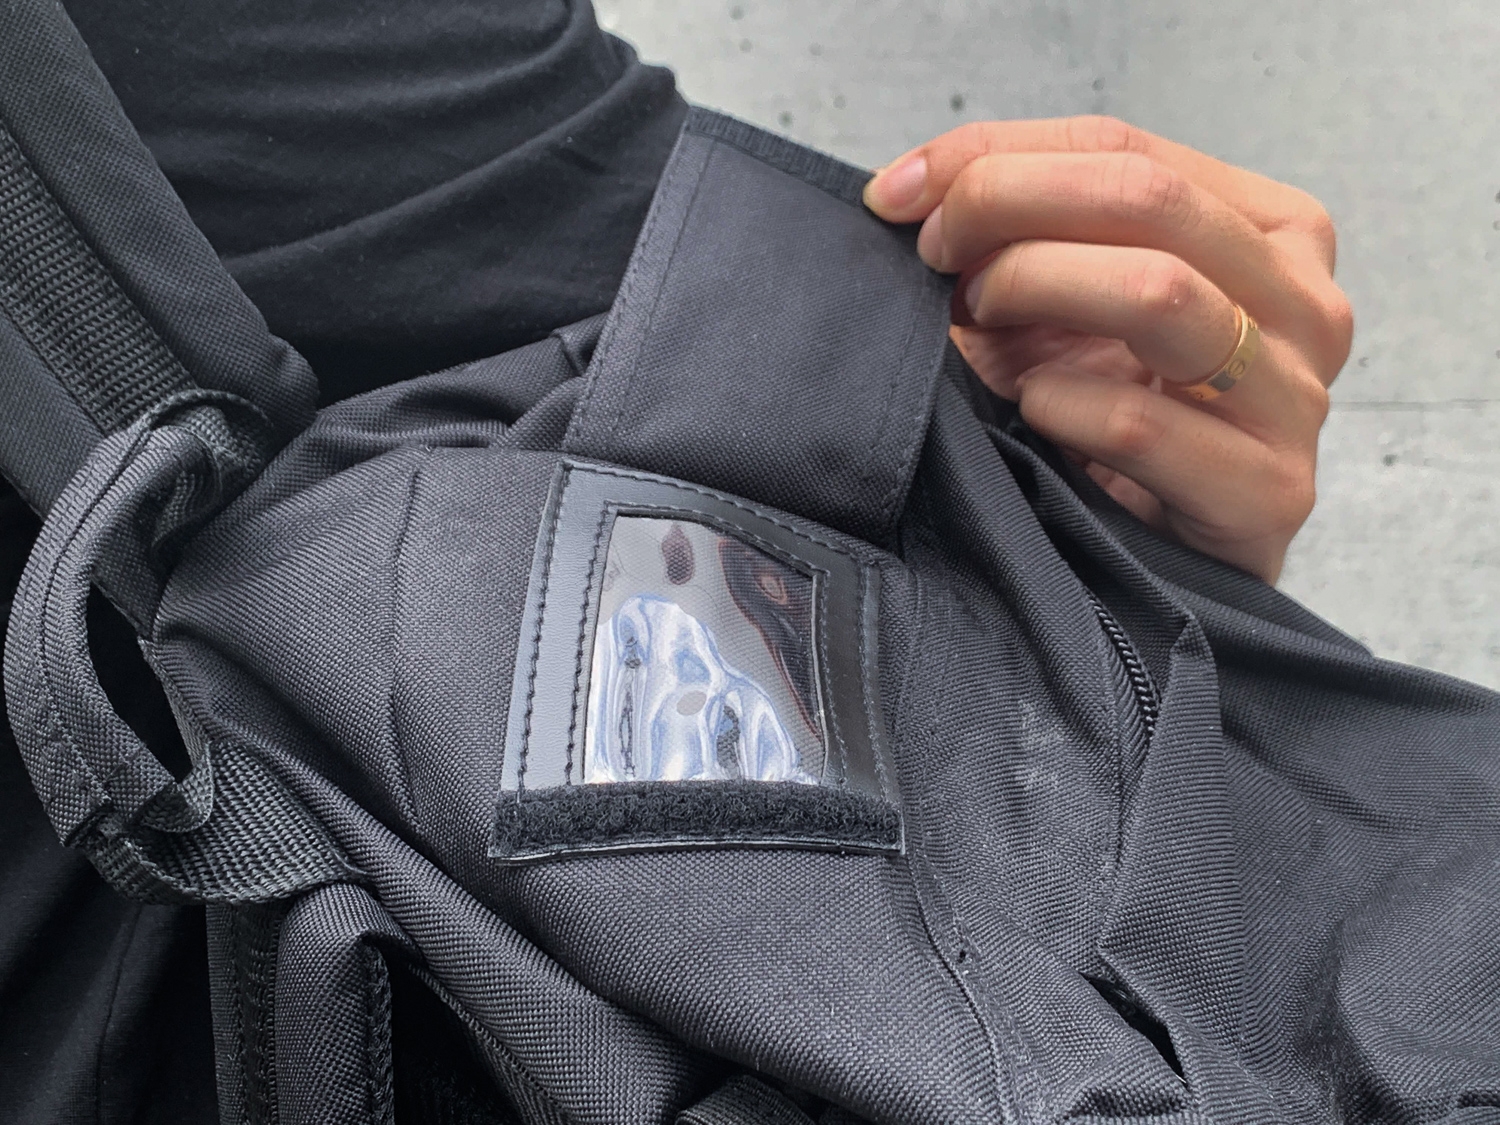 This ID display that can be concealed with a flap is a signature of military backpacks.